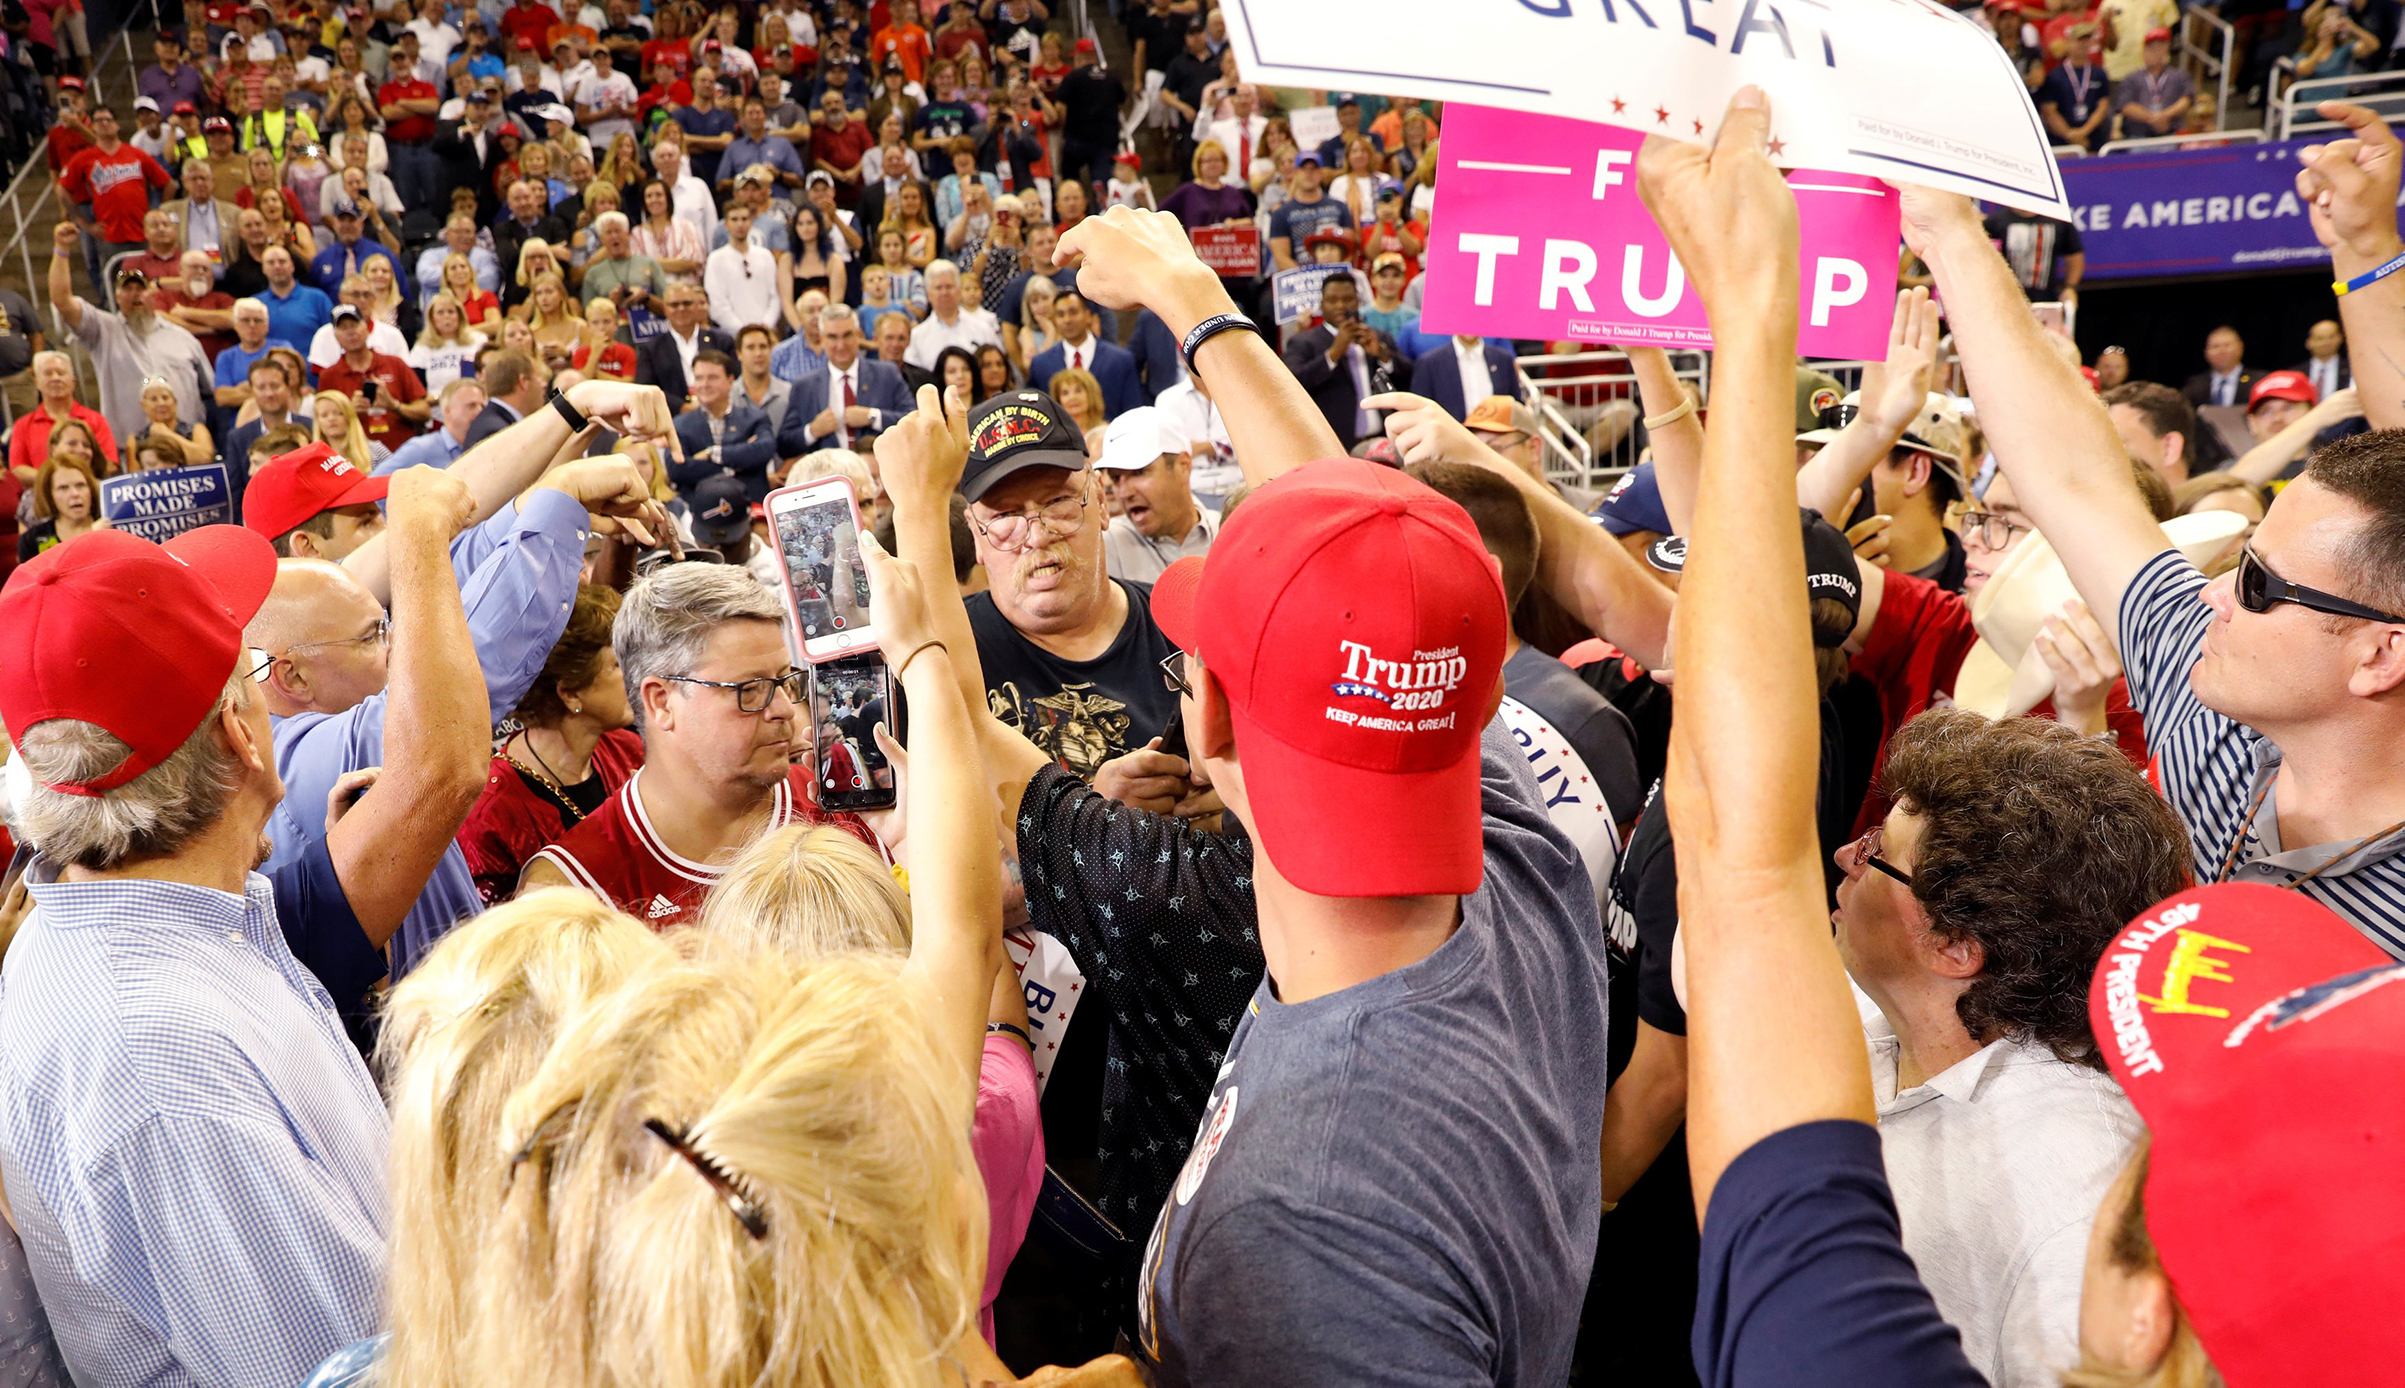 Trump supporters point out a protester to be removed during President Trump's 